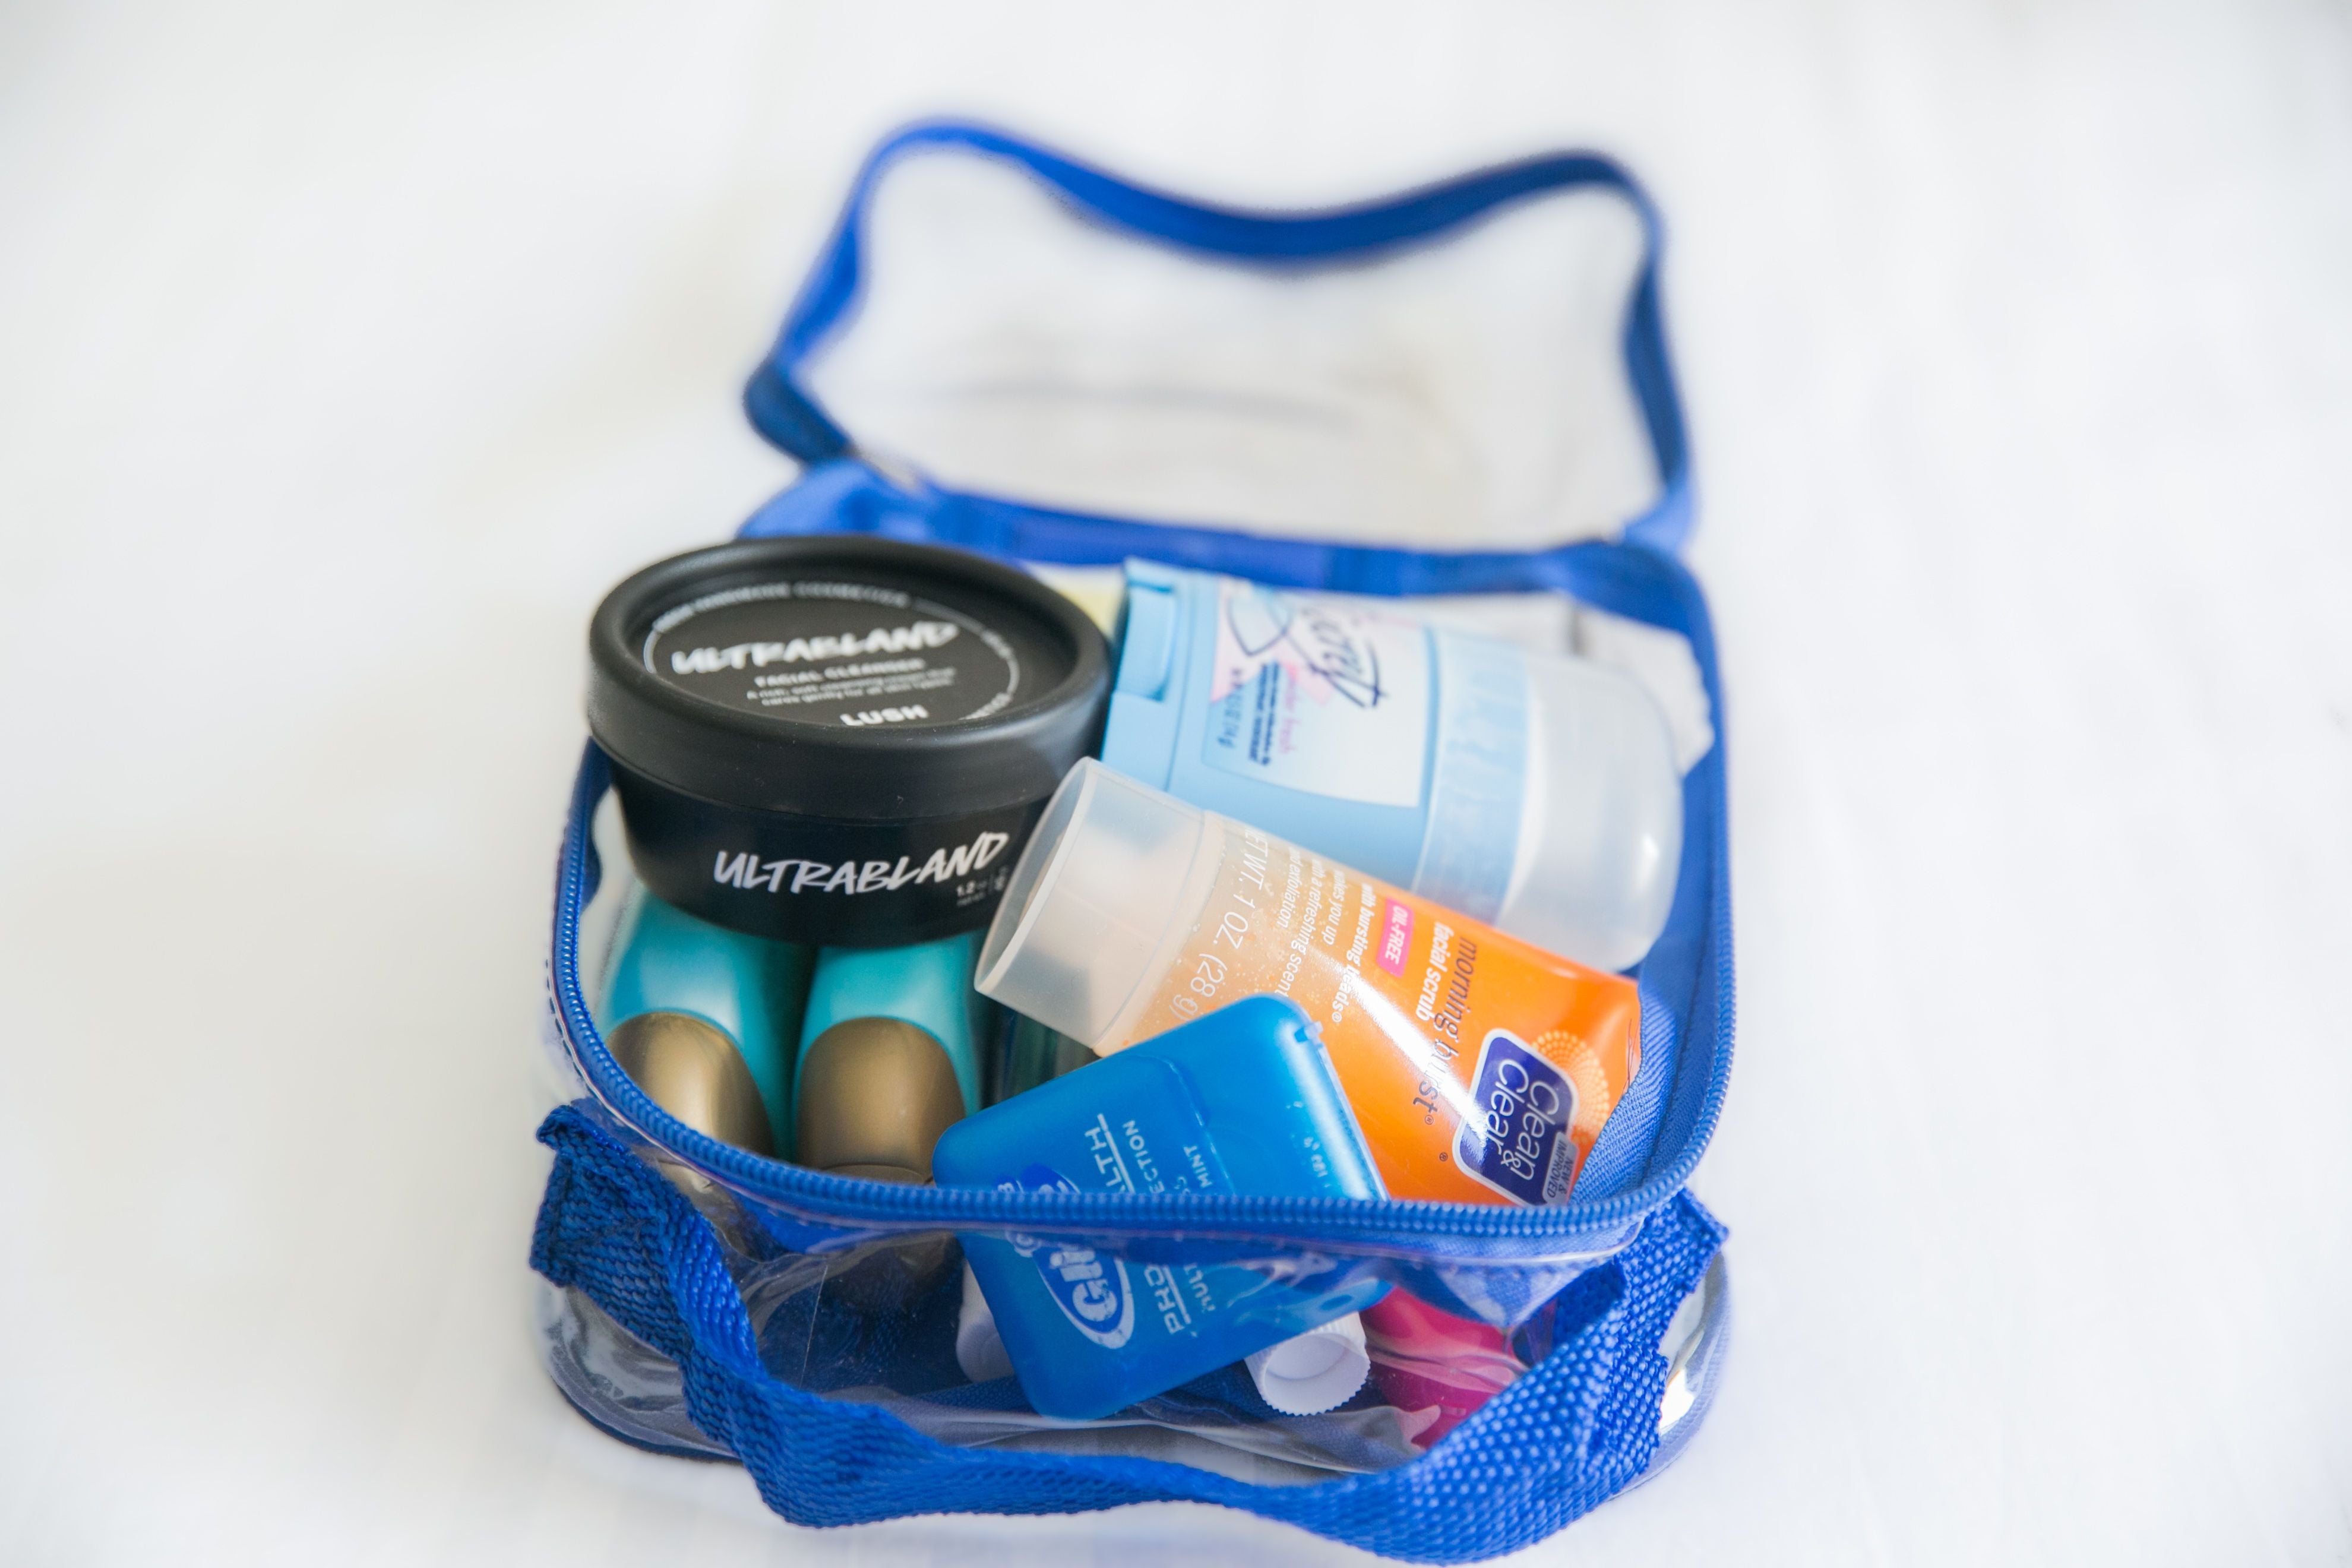 Toiletries for summer vacation packing list